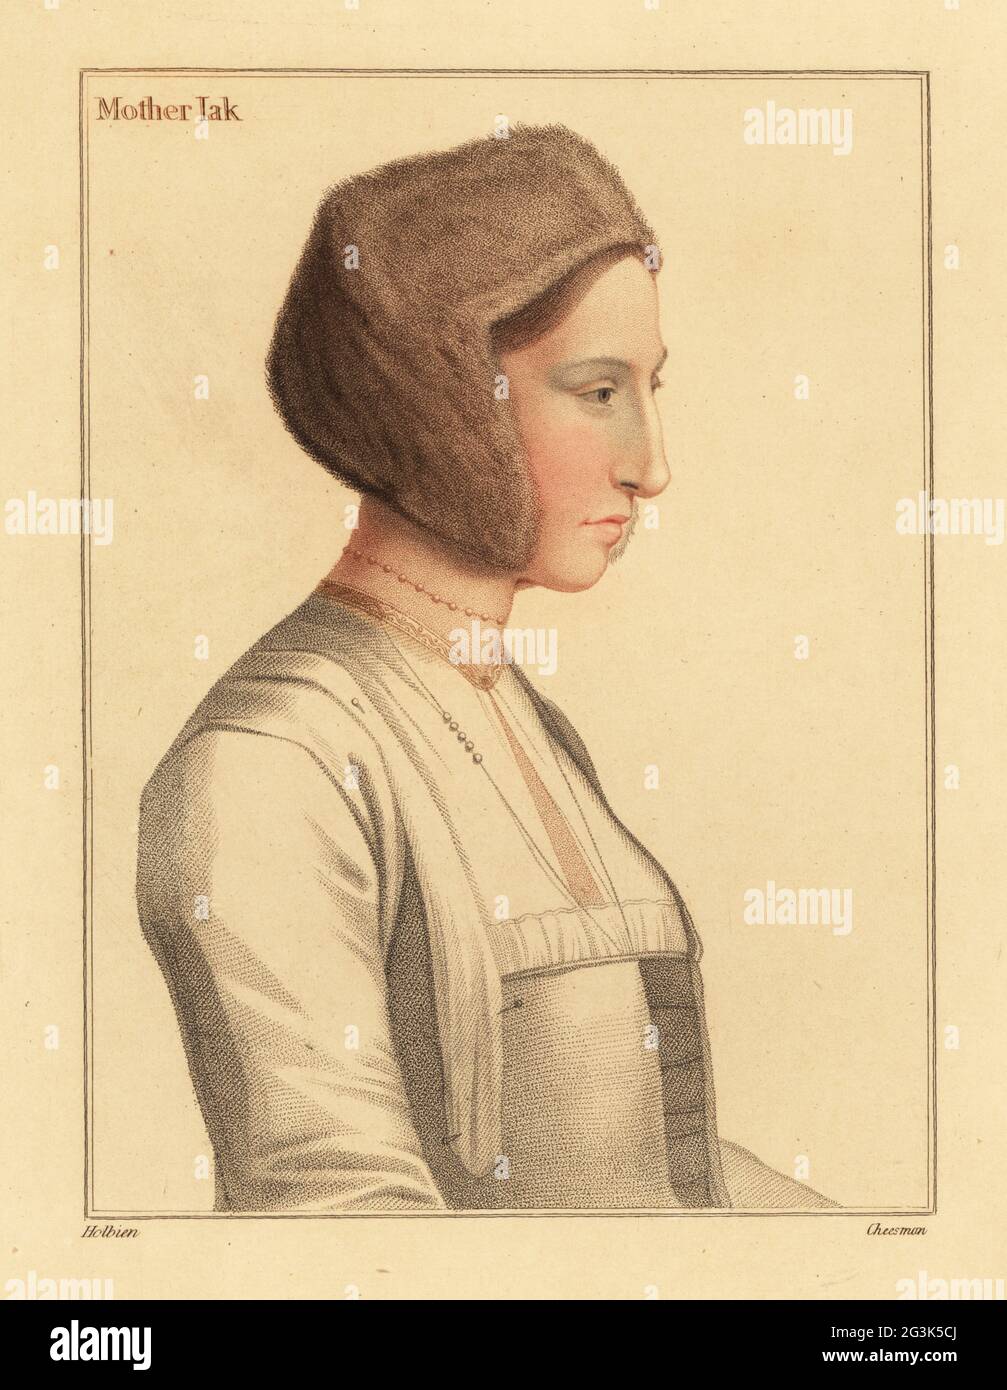 Margaret Clement (née Giggs), foster daughter of Thomas More, wife to John Clement, tutor to the More children. (Mislabeled as Mother Jak, nurse to King Edward VI.) Mother Iak. Handcoloured copperplate stipple engraving by Thomas Cheesman after a portrait by Hans Holbein the Younger from Imitations of Original Drawings by Hans Holbein, John Chamberlaine, London, 1812. Stock Photo